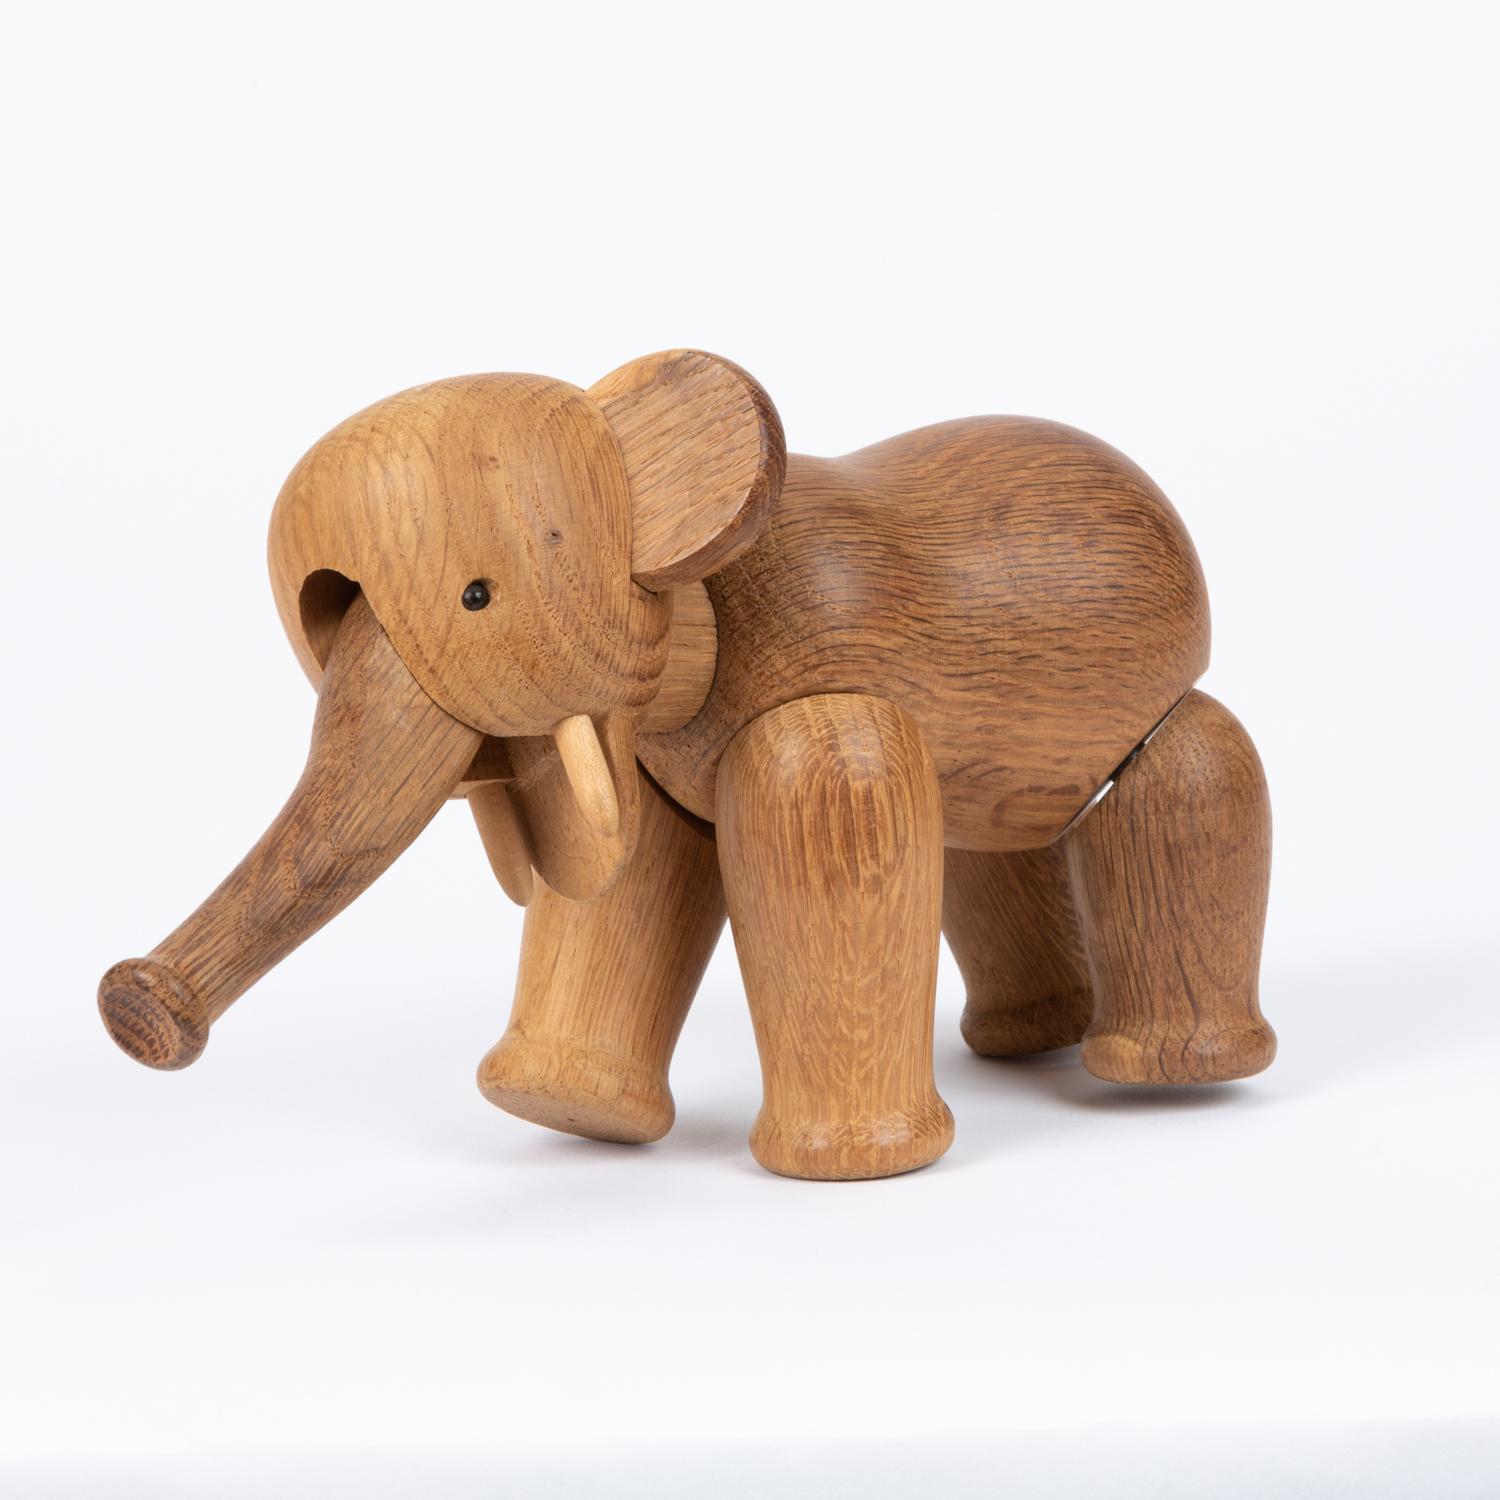 An original wooden elephant figurine by Kay Bojesen, Denmark, circa 1960s. The figurine consists of multiple hand carved oak pieces that form a Kinetic sculpture with multiple freeform movements. Marked 